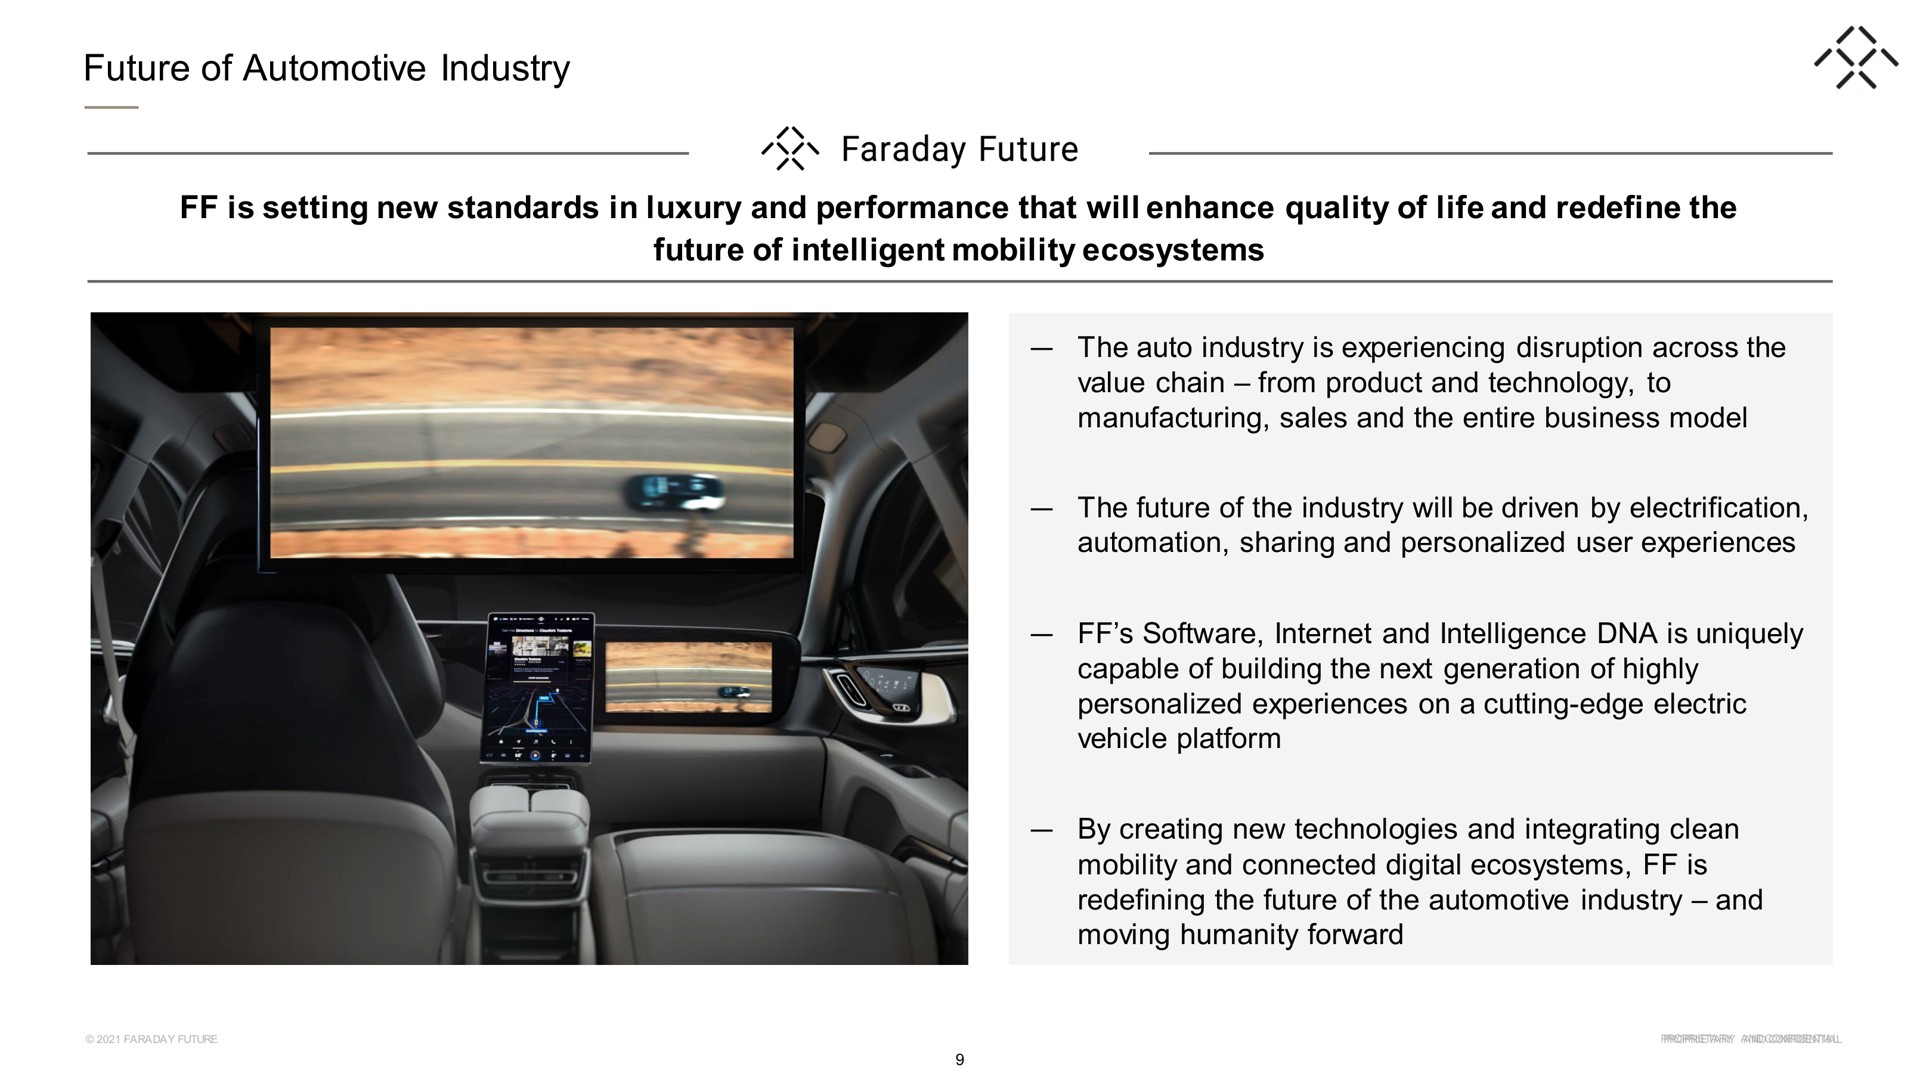 future of automotive industry is setting new standards in luxury and performance that will enhance quality of life and redefine the future of intelligent mobility ecosystems the auto industry is experiencing disruption across the value chain from product and technology to manufacturing sales and the entire business model the future of the industry will be driven by electrification sharing and personalized user experiences and intelligence is uniquely capable of building the next generation of highly personalized experiences on a cutting edge electric vehicle platform by creating new technologies and integrating clean mobility and connected digital ecosystems is redefining the future of the automotive industry and moving humanity forward faraday | Faraday Future